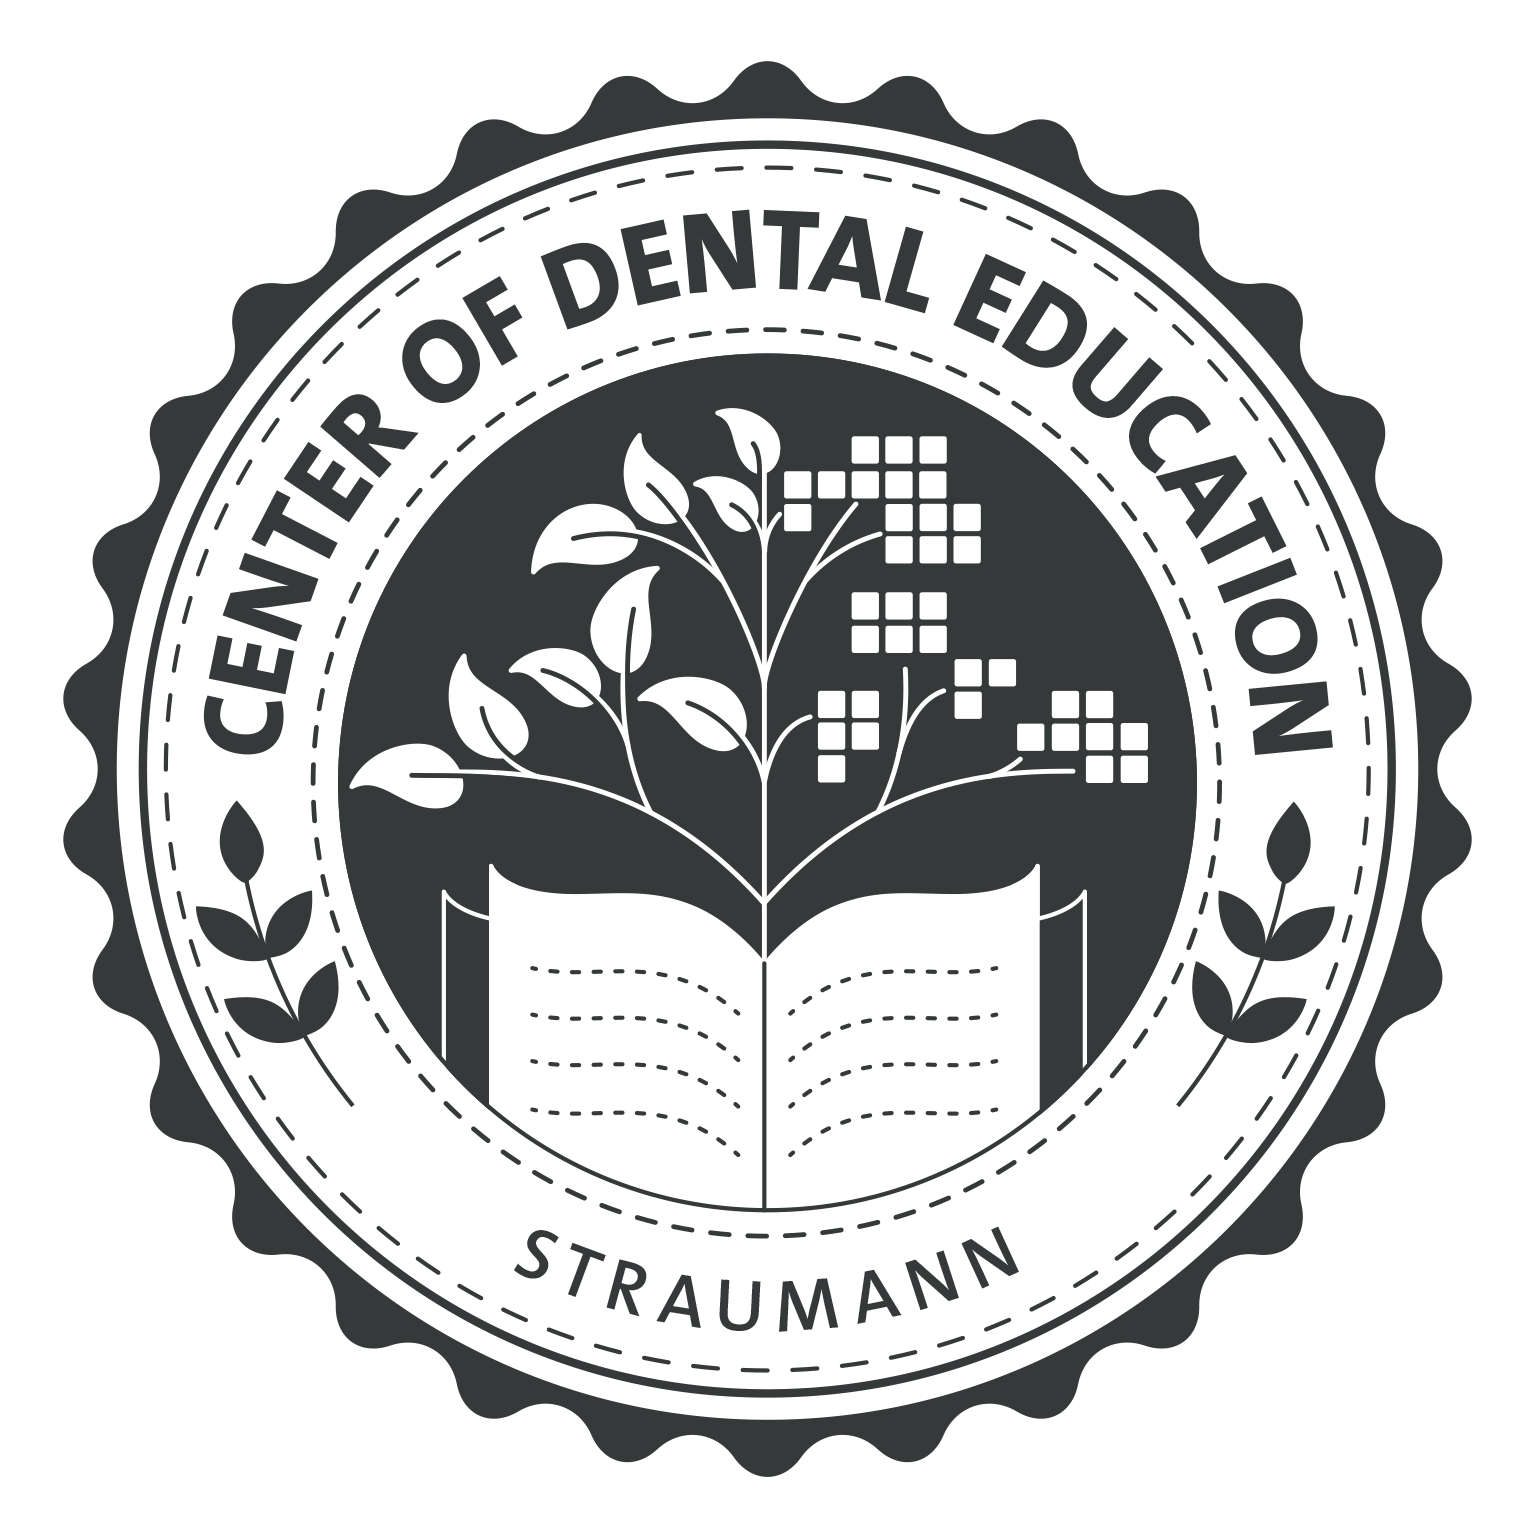 Centres of Dental Education – CoDe